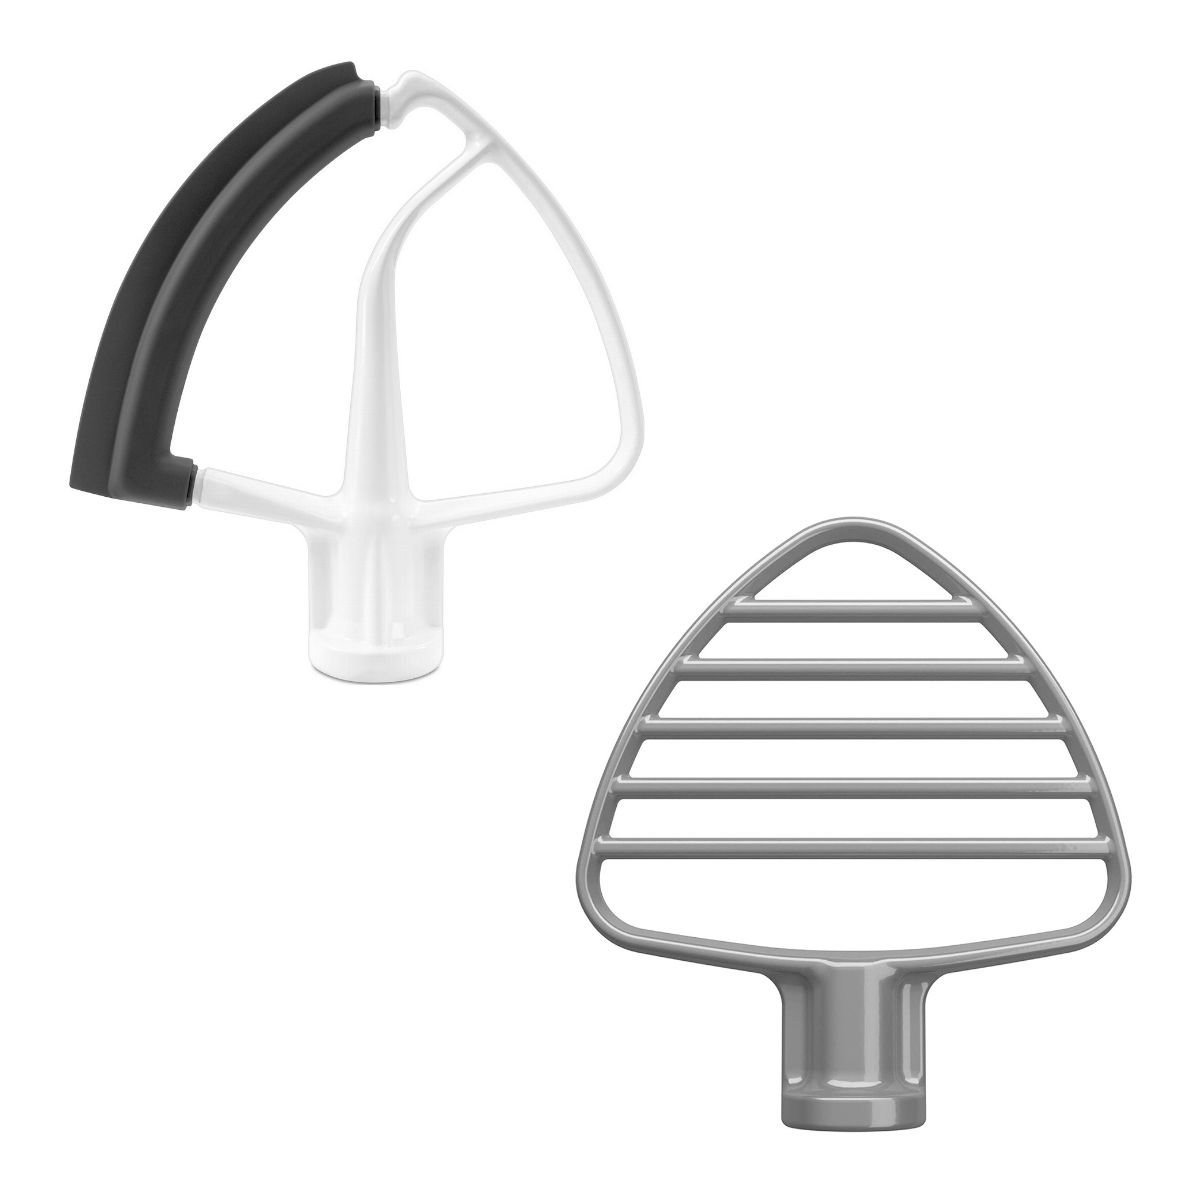 Coated Flat Beater Compatible with KitchenAid Mixer Ksm90 KSM150 K45 K45ss, Kitchen Aid Ultra Power/Classic/Artisan Stand Mixer Assecories.